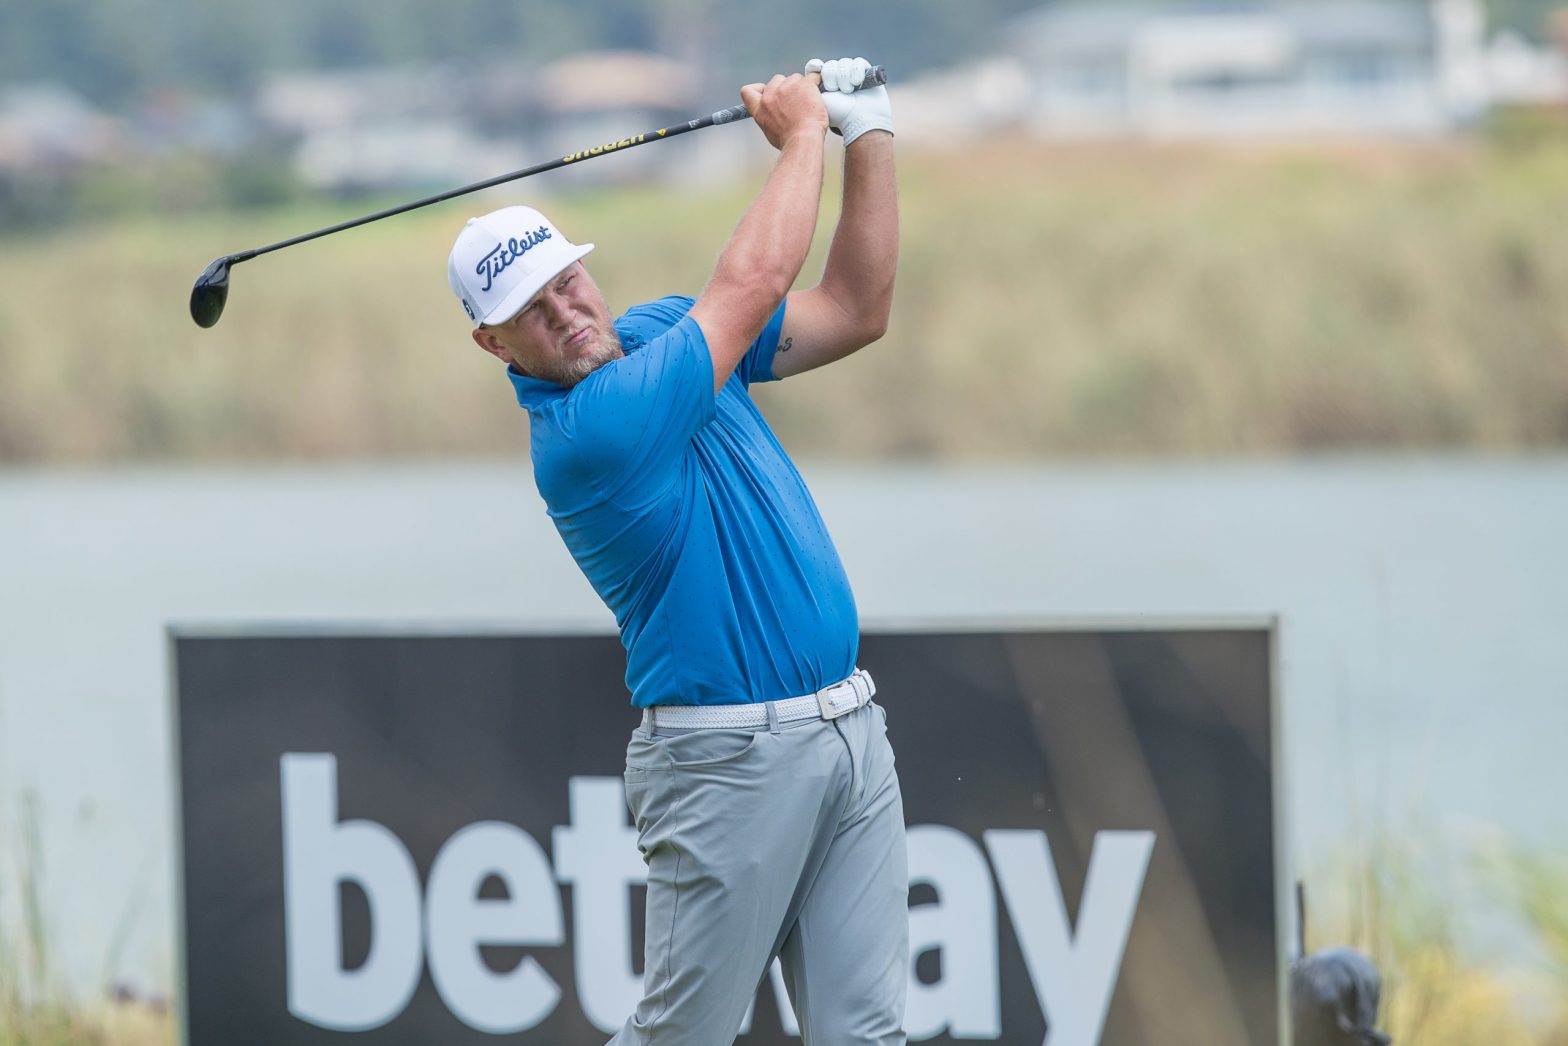 Tristen tops on day one in Gauteng Championship presented by Betway